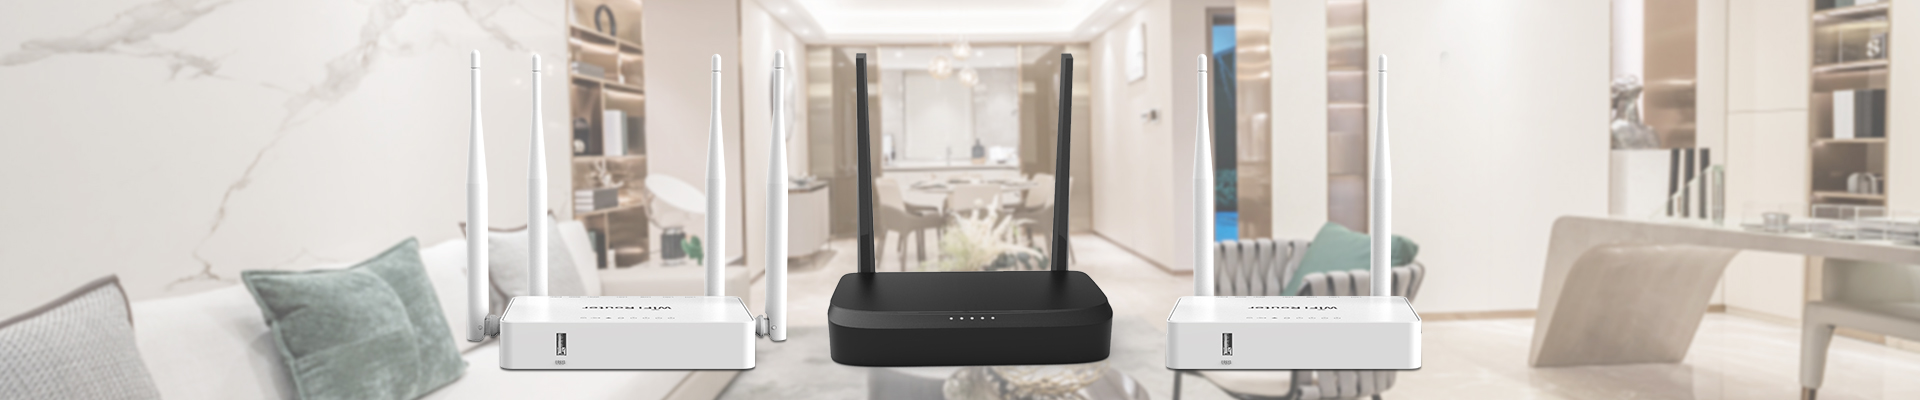 300Mbps 2.4Ghz Wireless Router